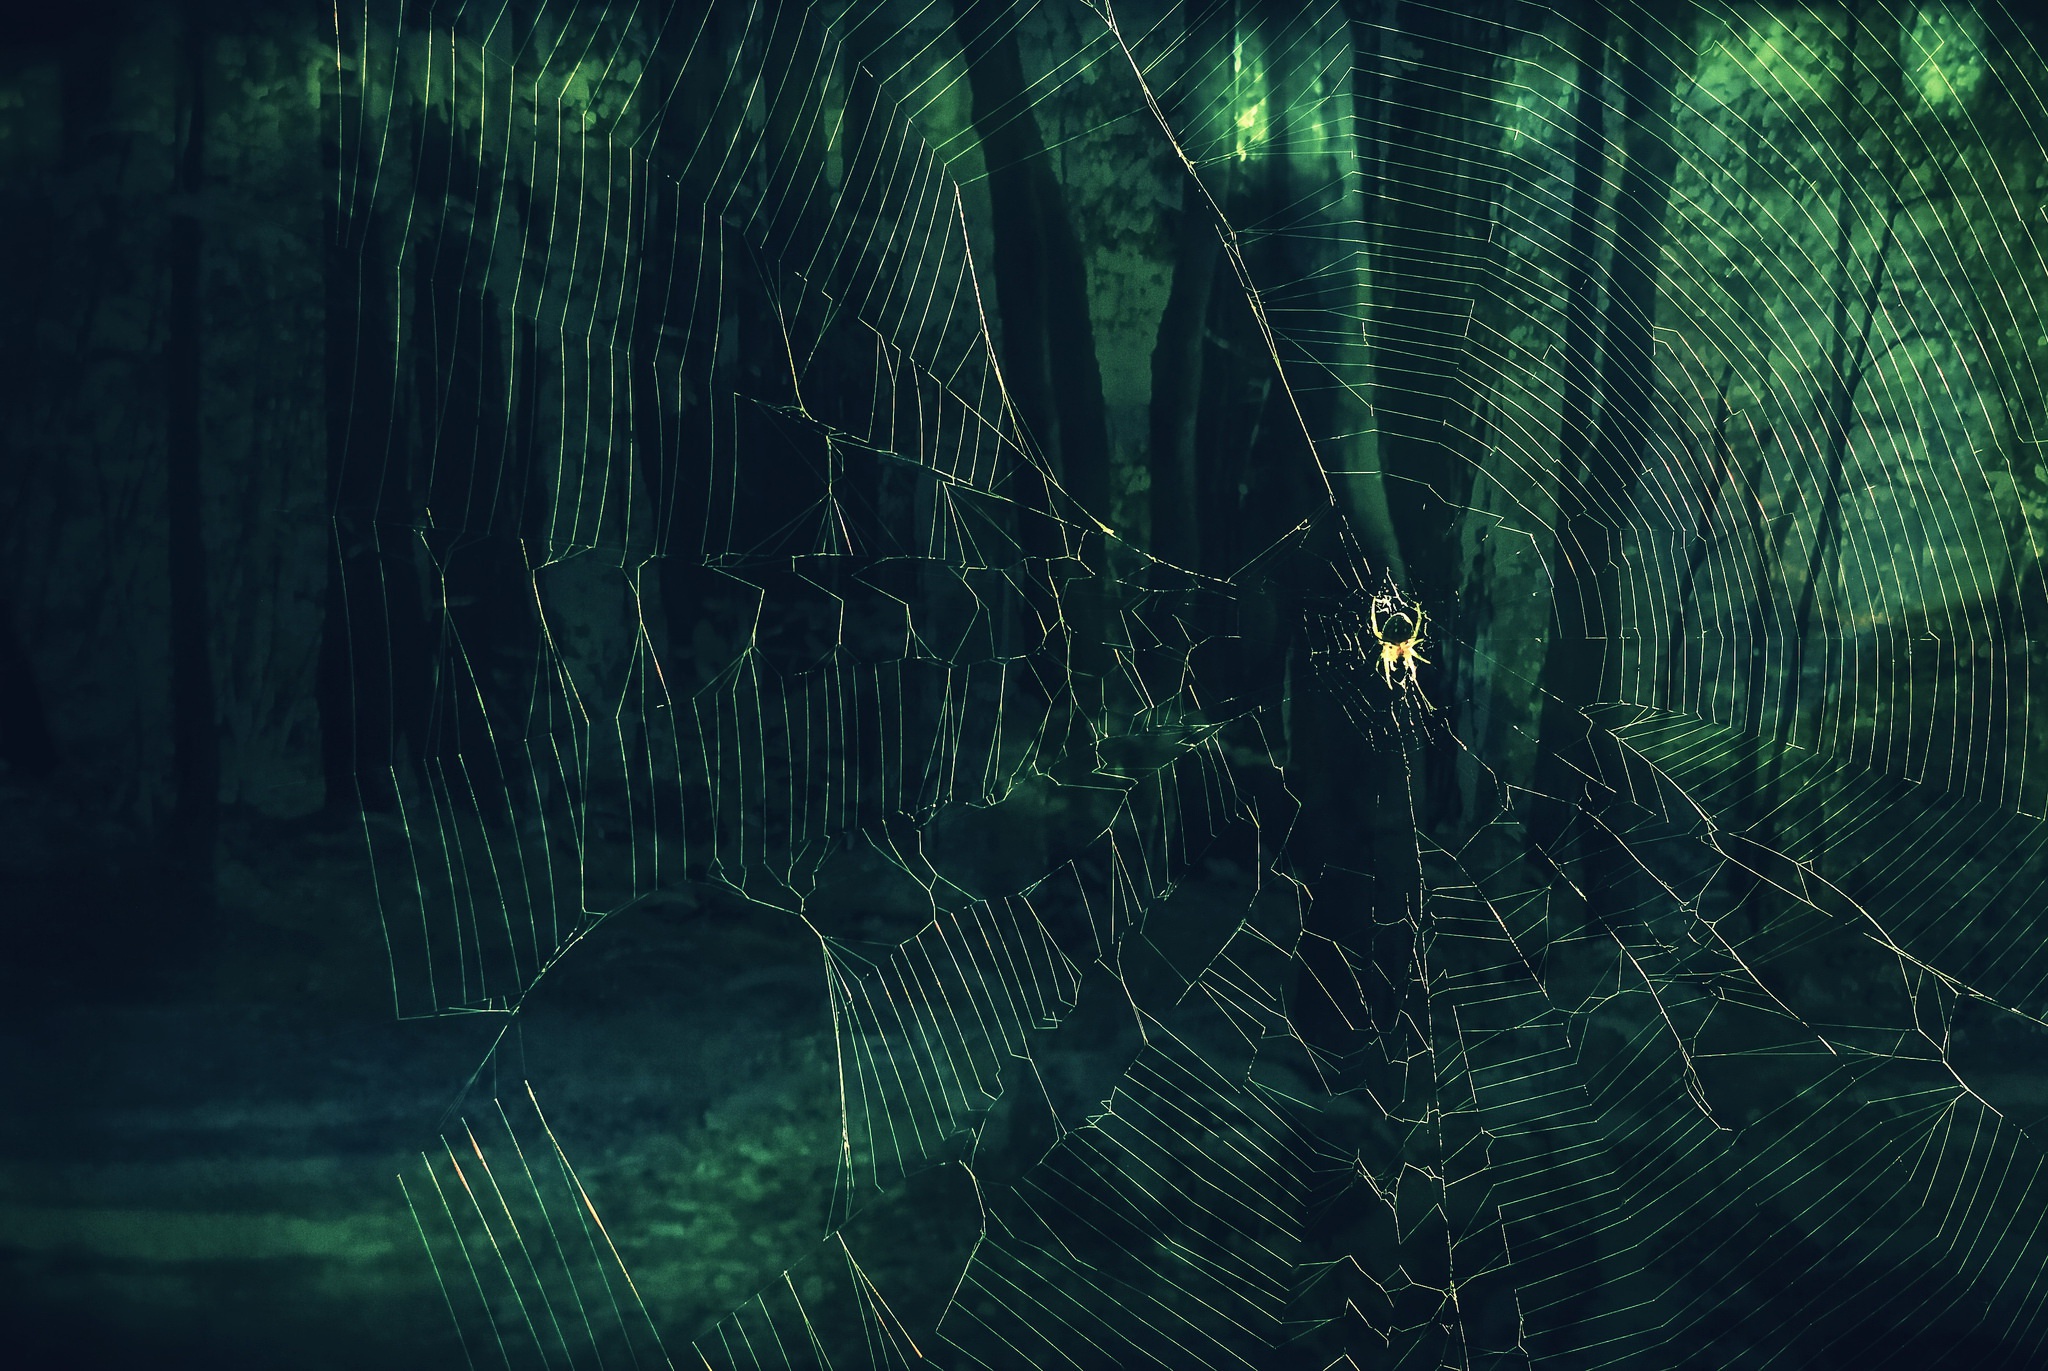 General 2048x1371 spider spiderwebs green nature trees low light